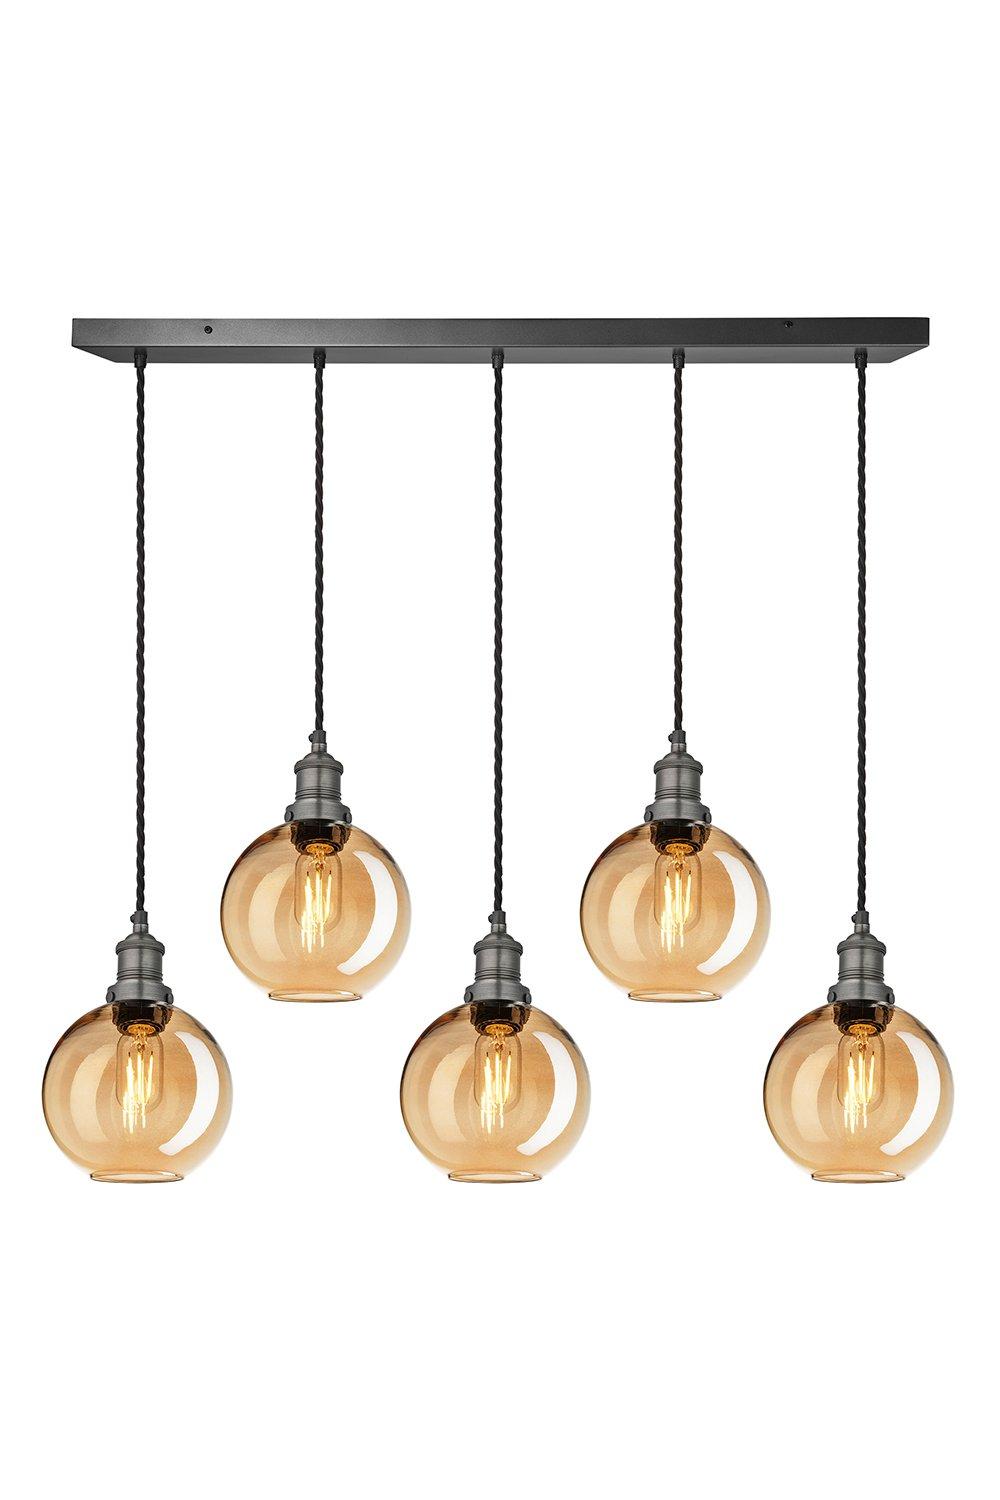 Brooklyn Tinted Glass Globe 5 Wire Cluster Lights, 7 inch, Amber, Pewter holder